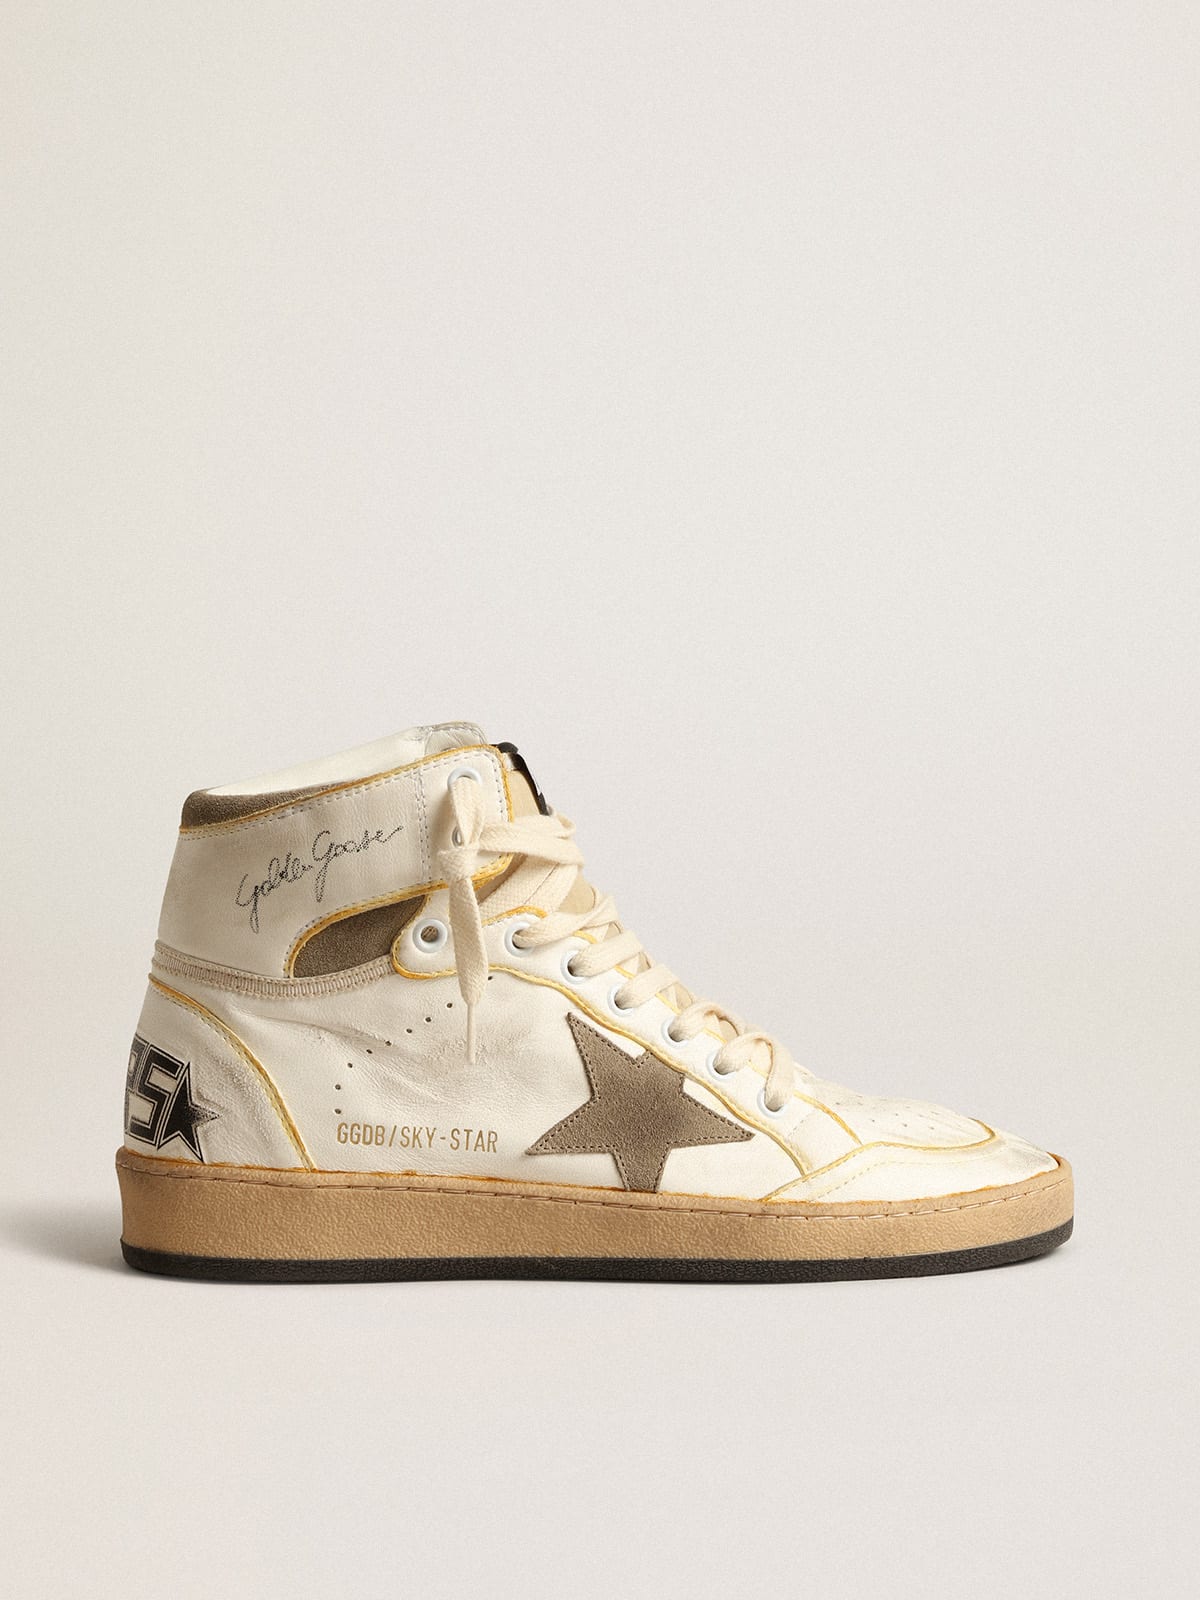 Golden Goose - Women’s Sky-Star in white nappa leather with dove-gray suede star in 